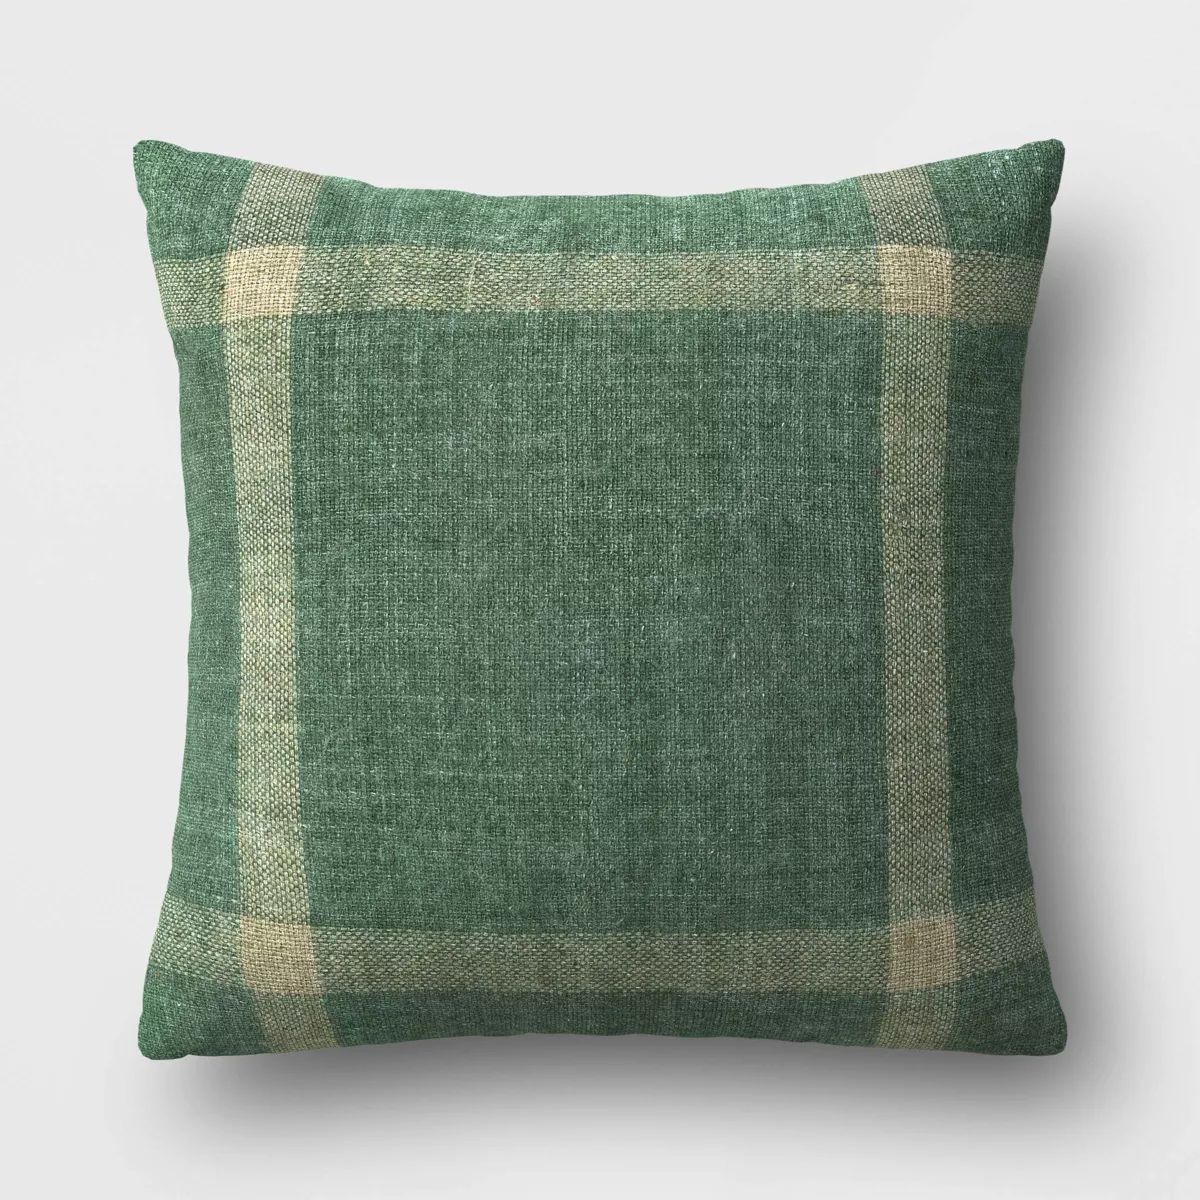 Oversized Woven Plaid Square Throw Pillow Green - Threshold™ | Target